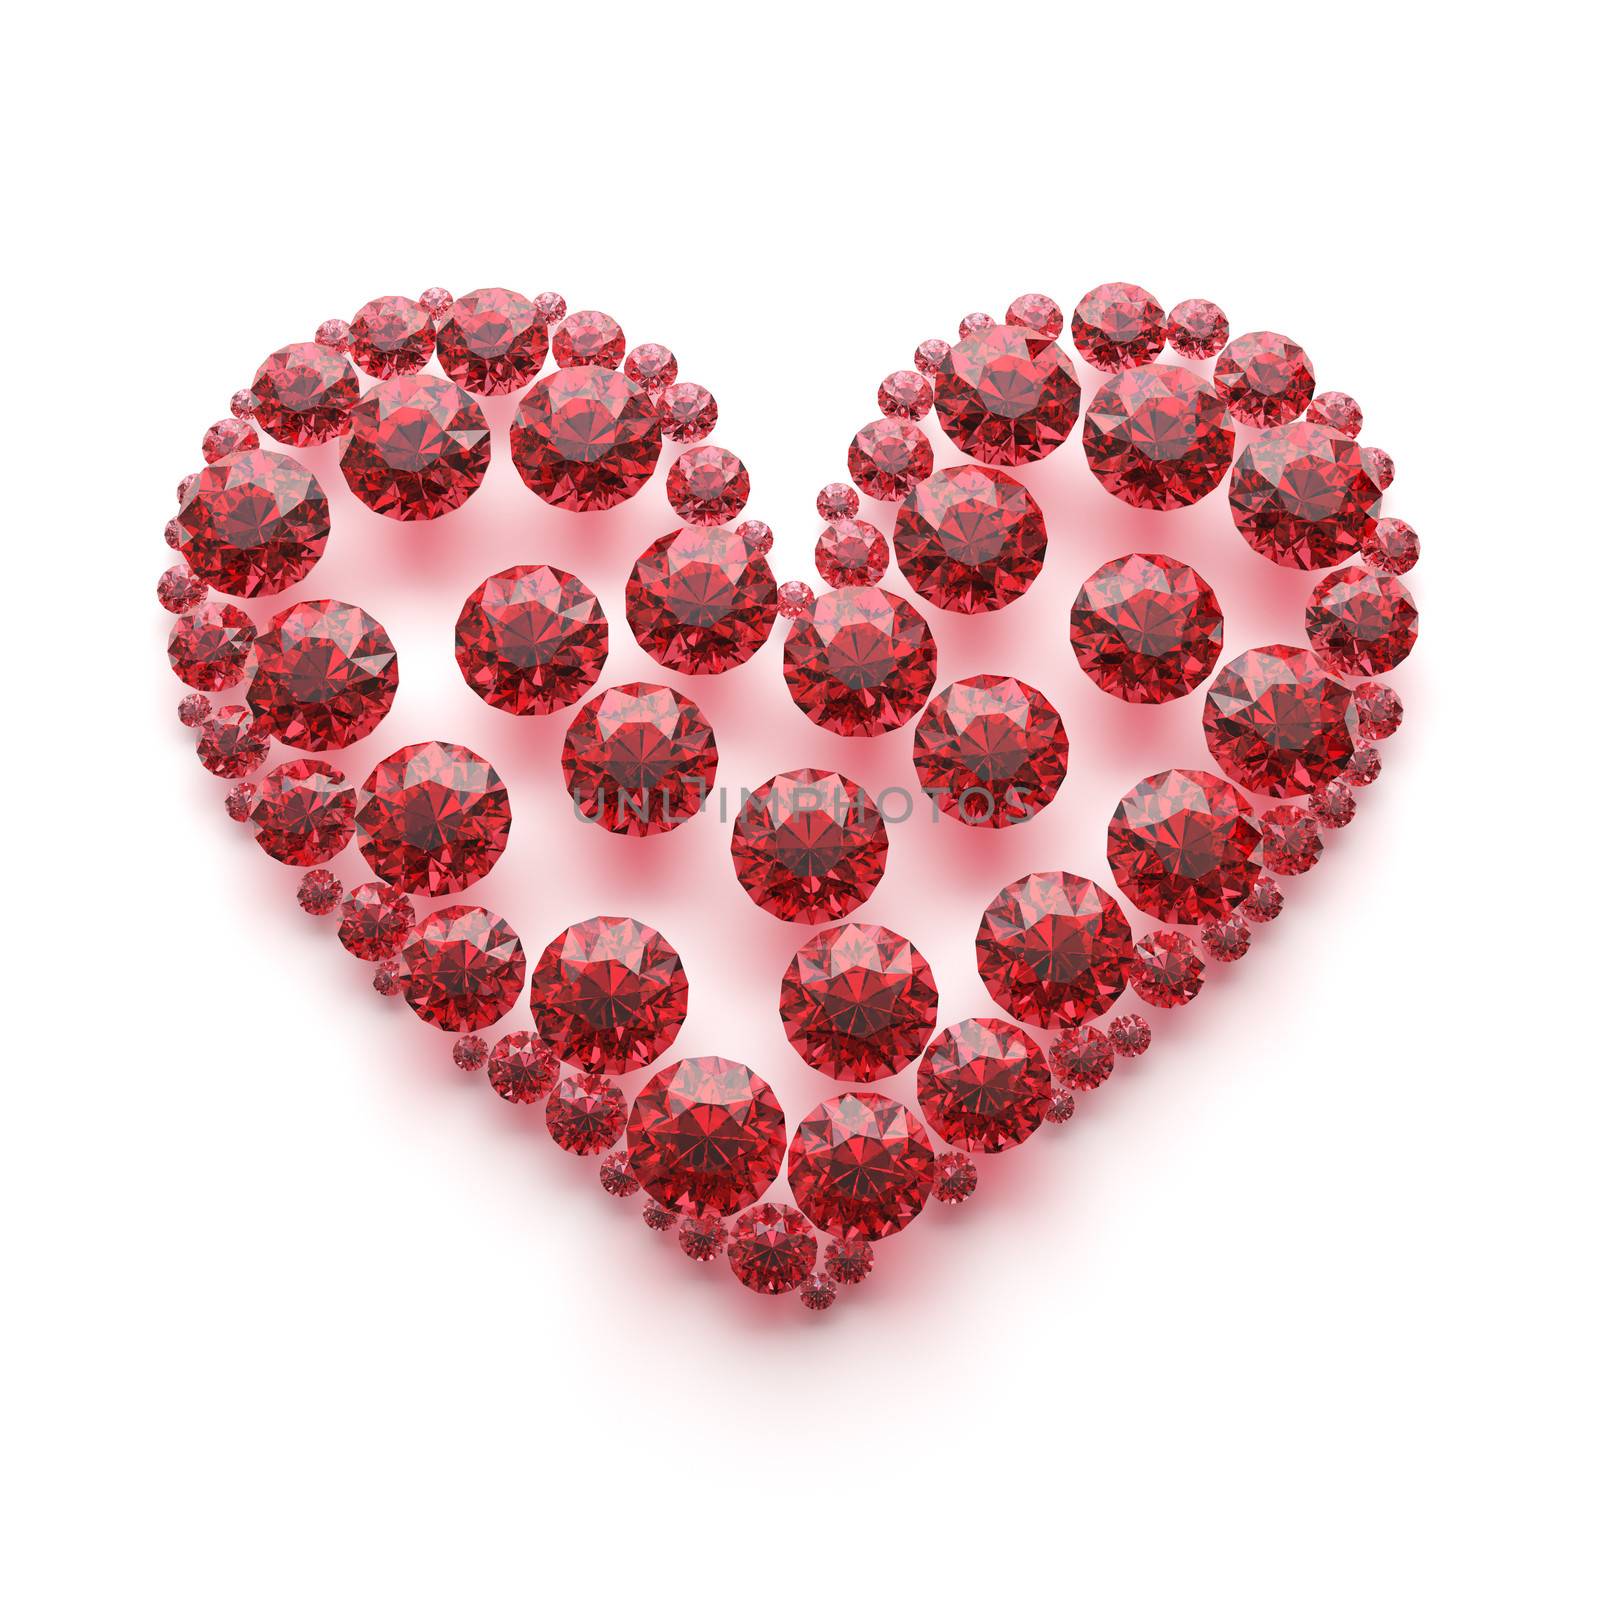 Red diamond heart on white- isolated with clipping path